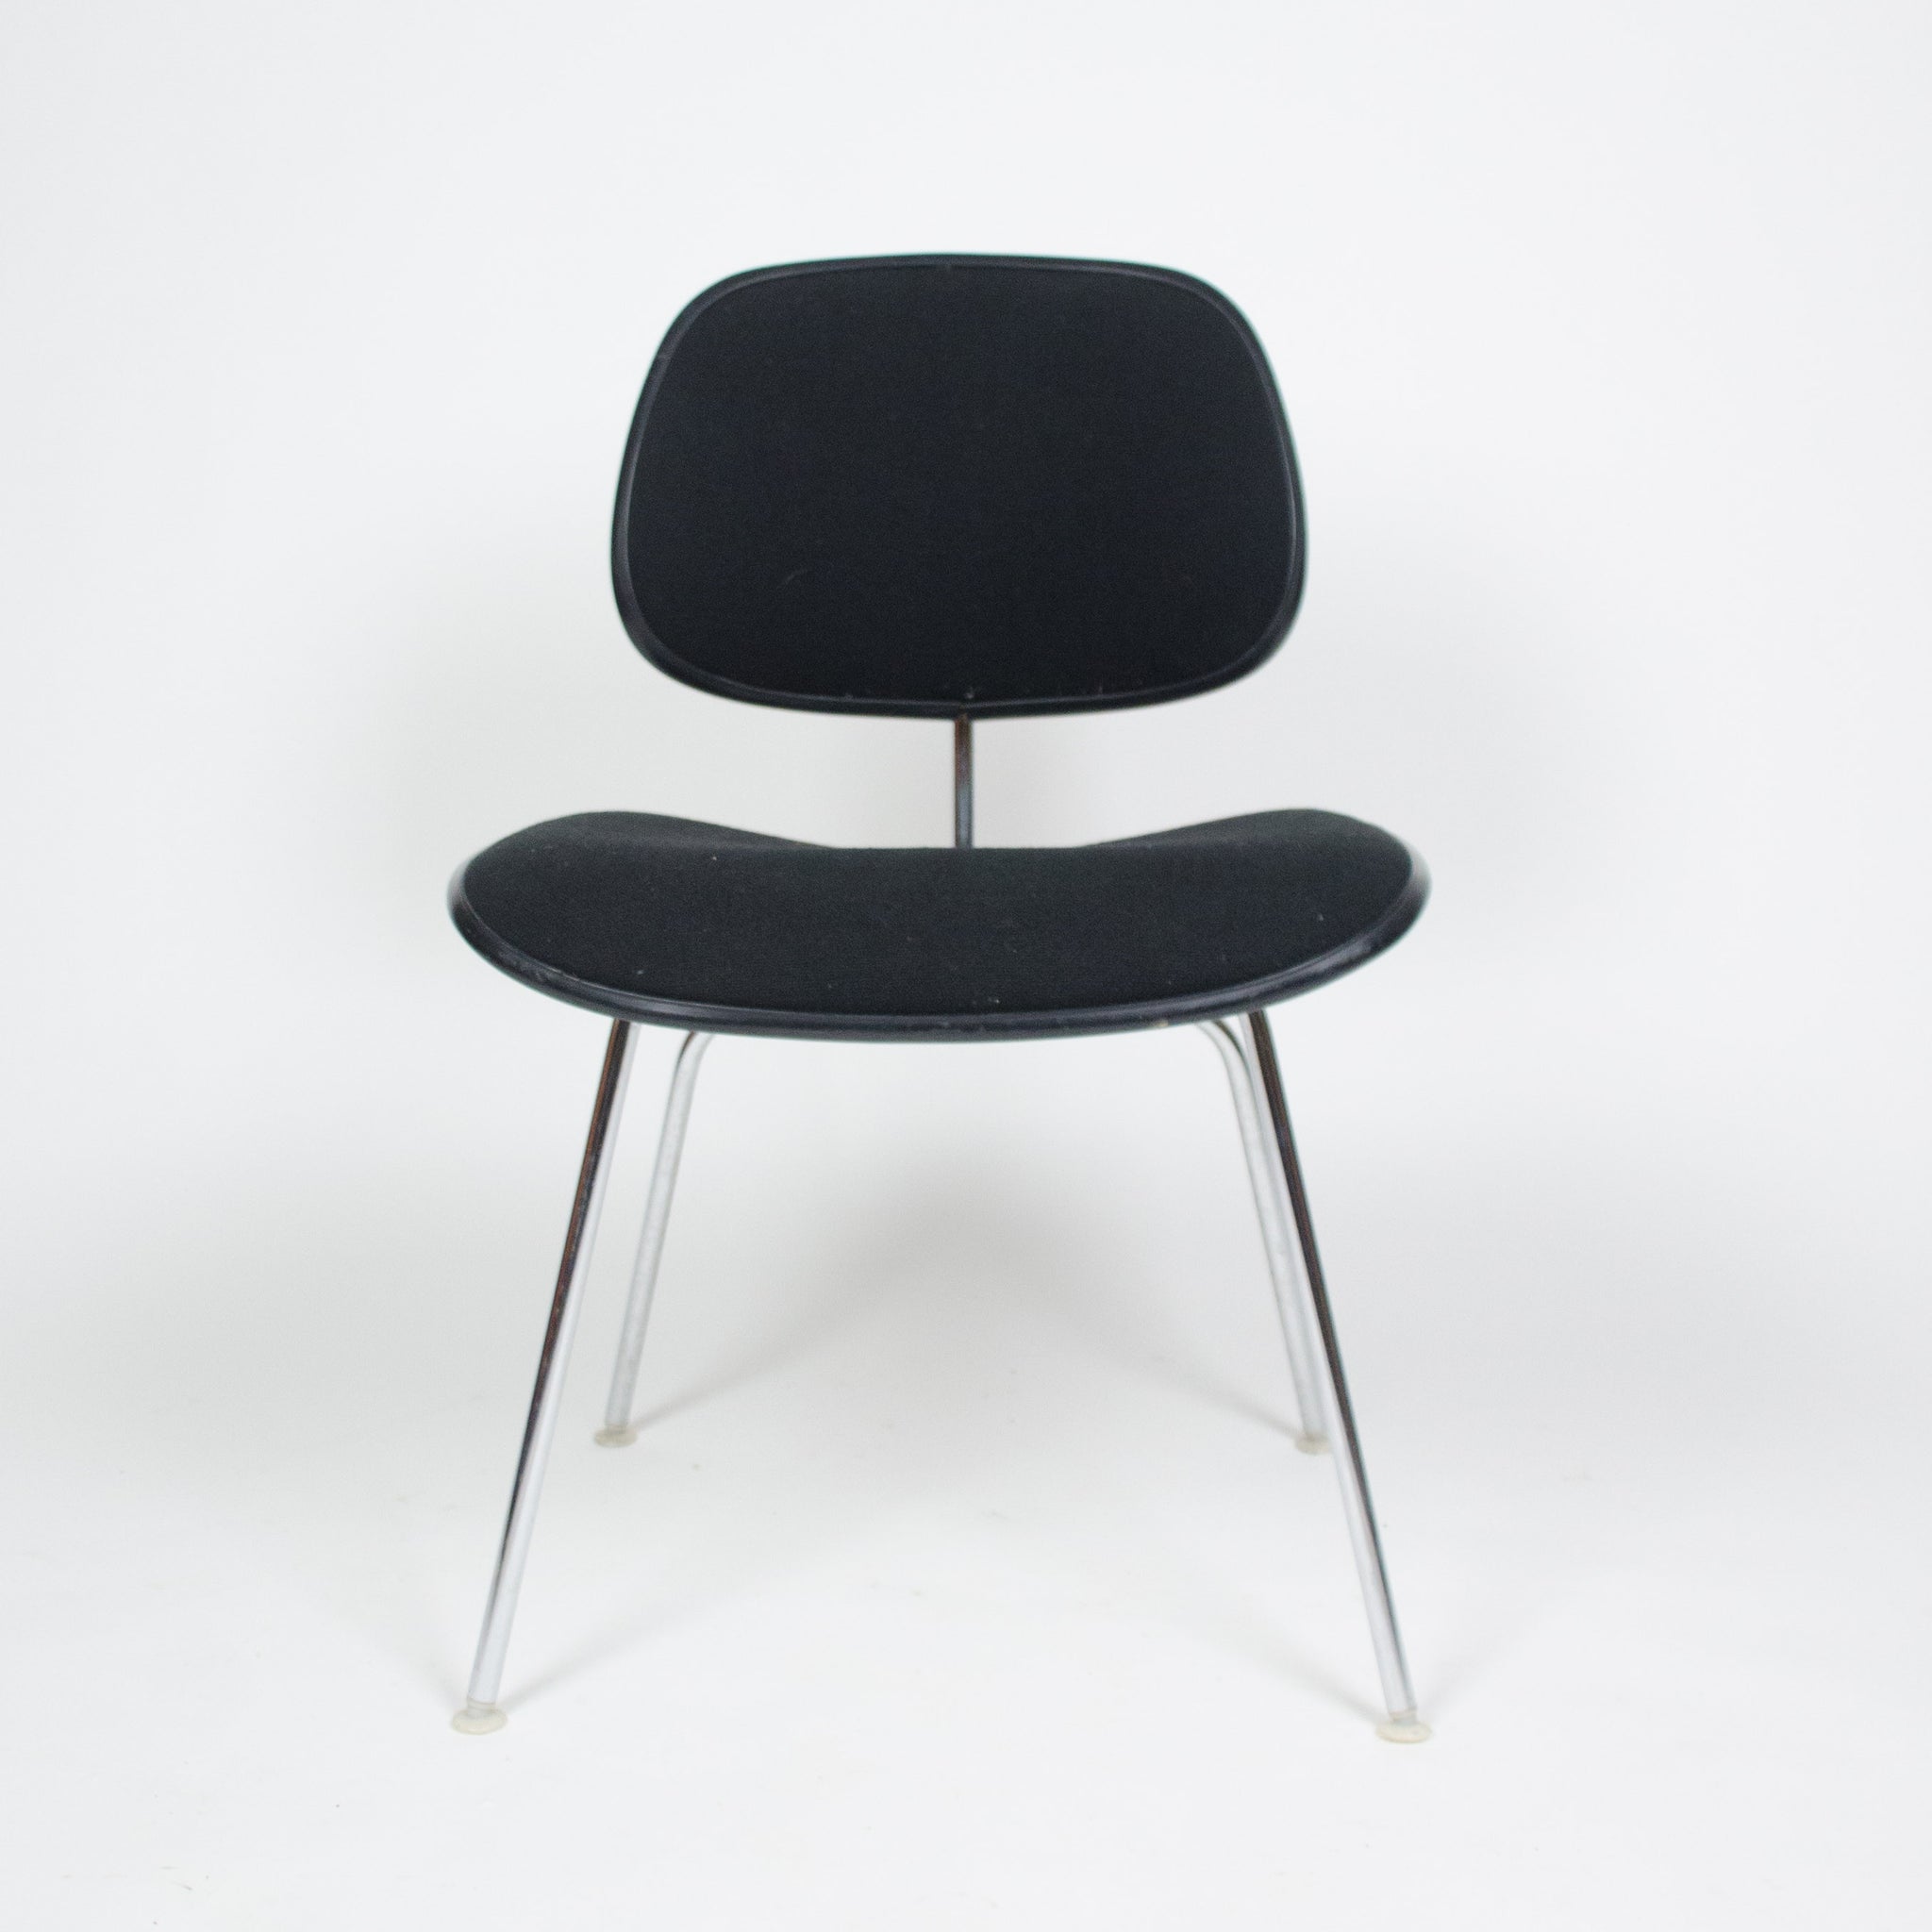 SOLD Eames Herman Miller Upholstered Alexander Girard DCM Chairs 1970s 4 Available